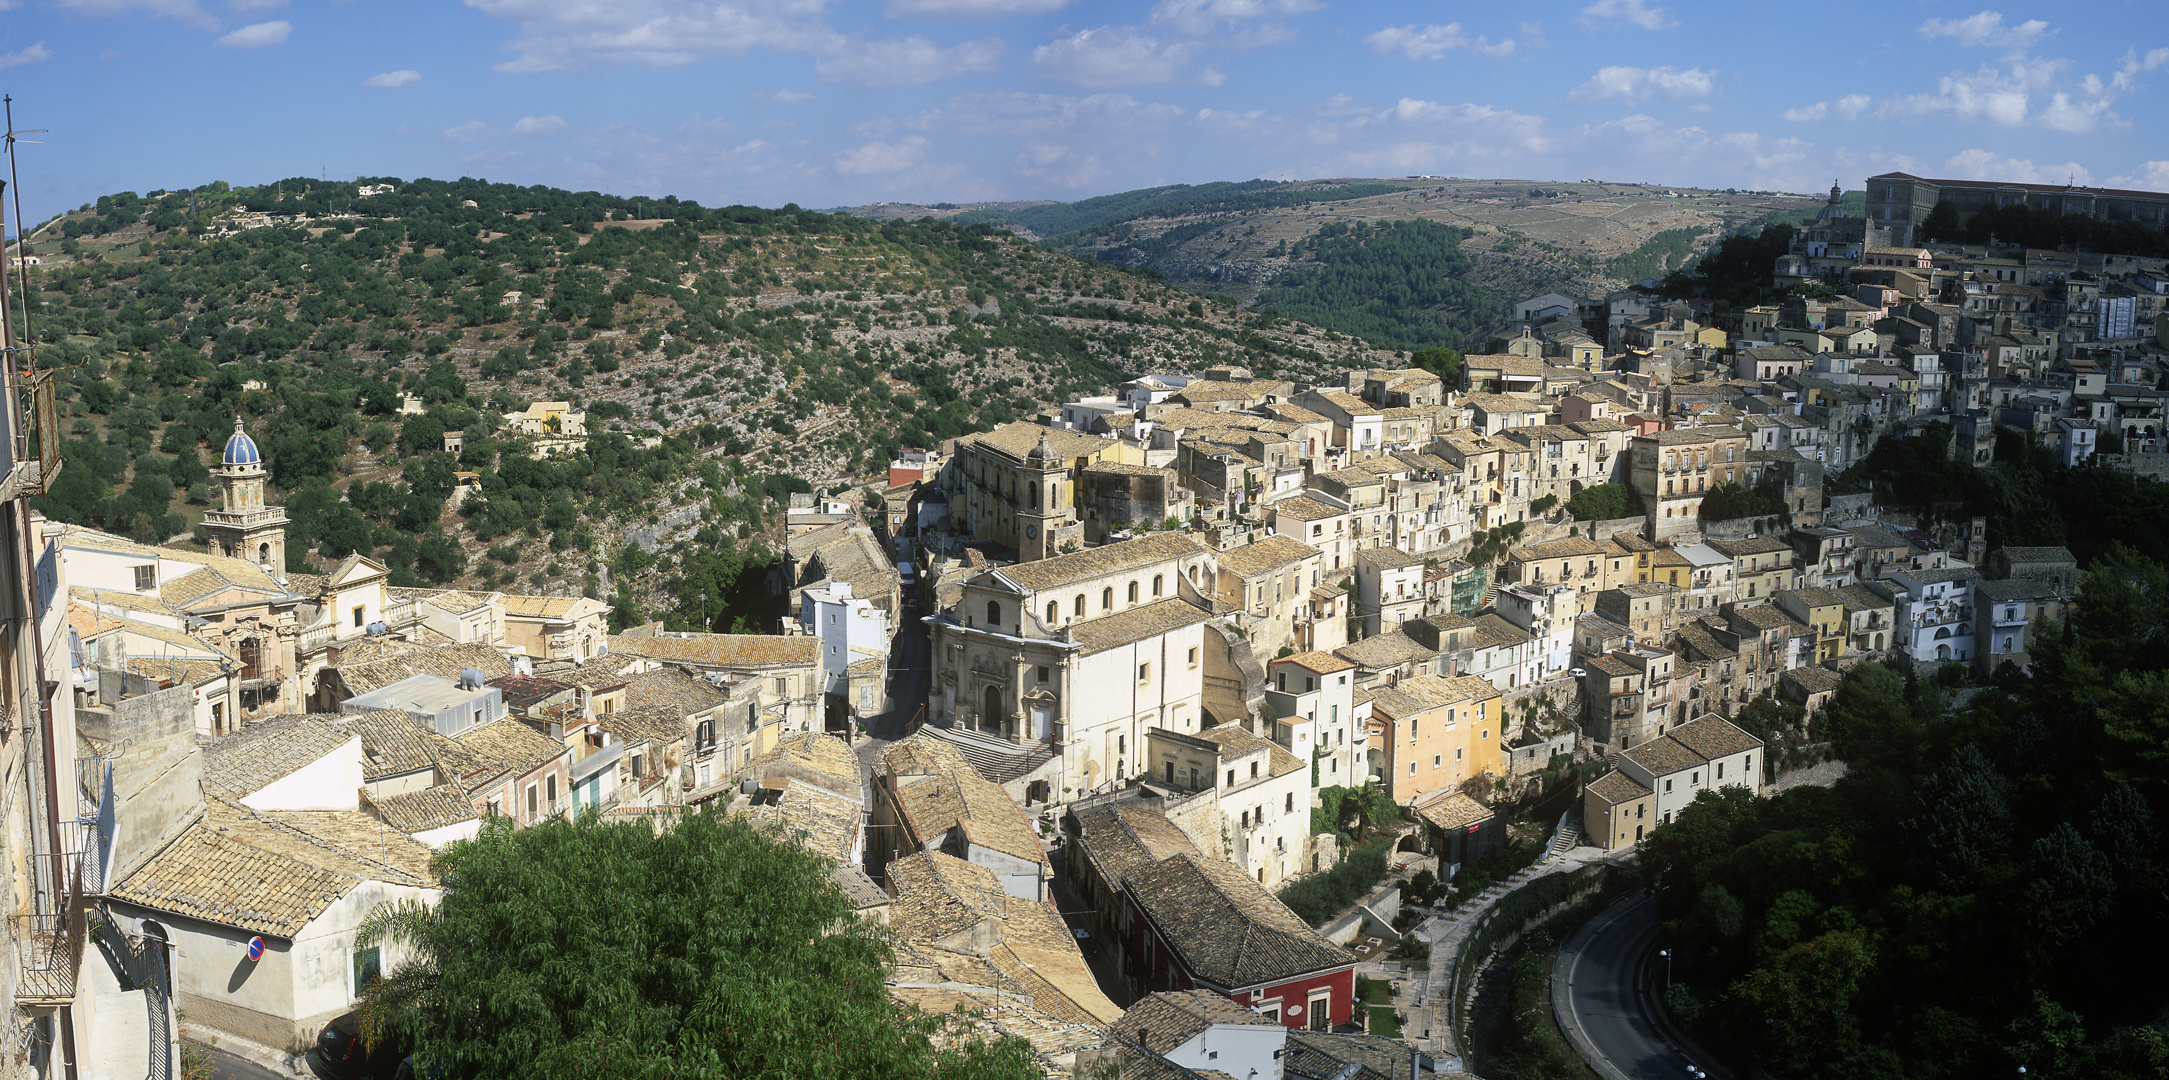 Ragusa archives, Historical records, Ancient city, Cultural heritage, 2170x1080 Dual Screen Desktop